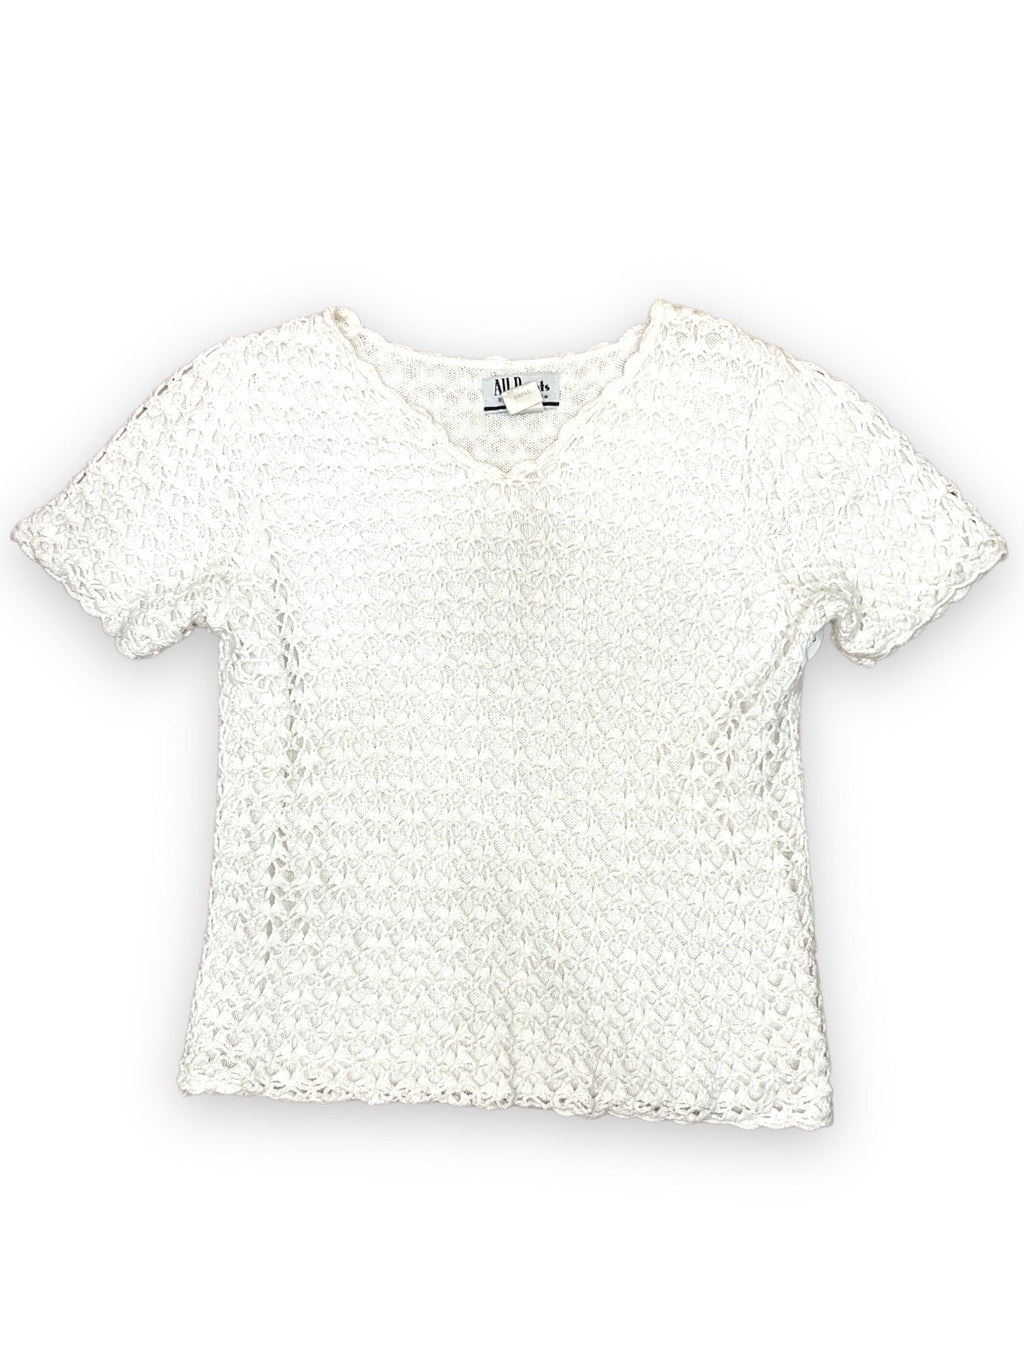 ALL POINTS WHITE CROCHET TOP